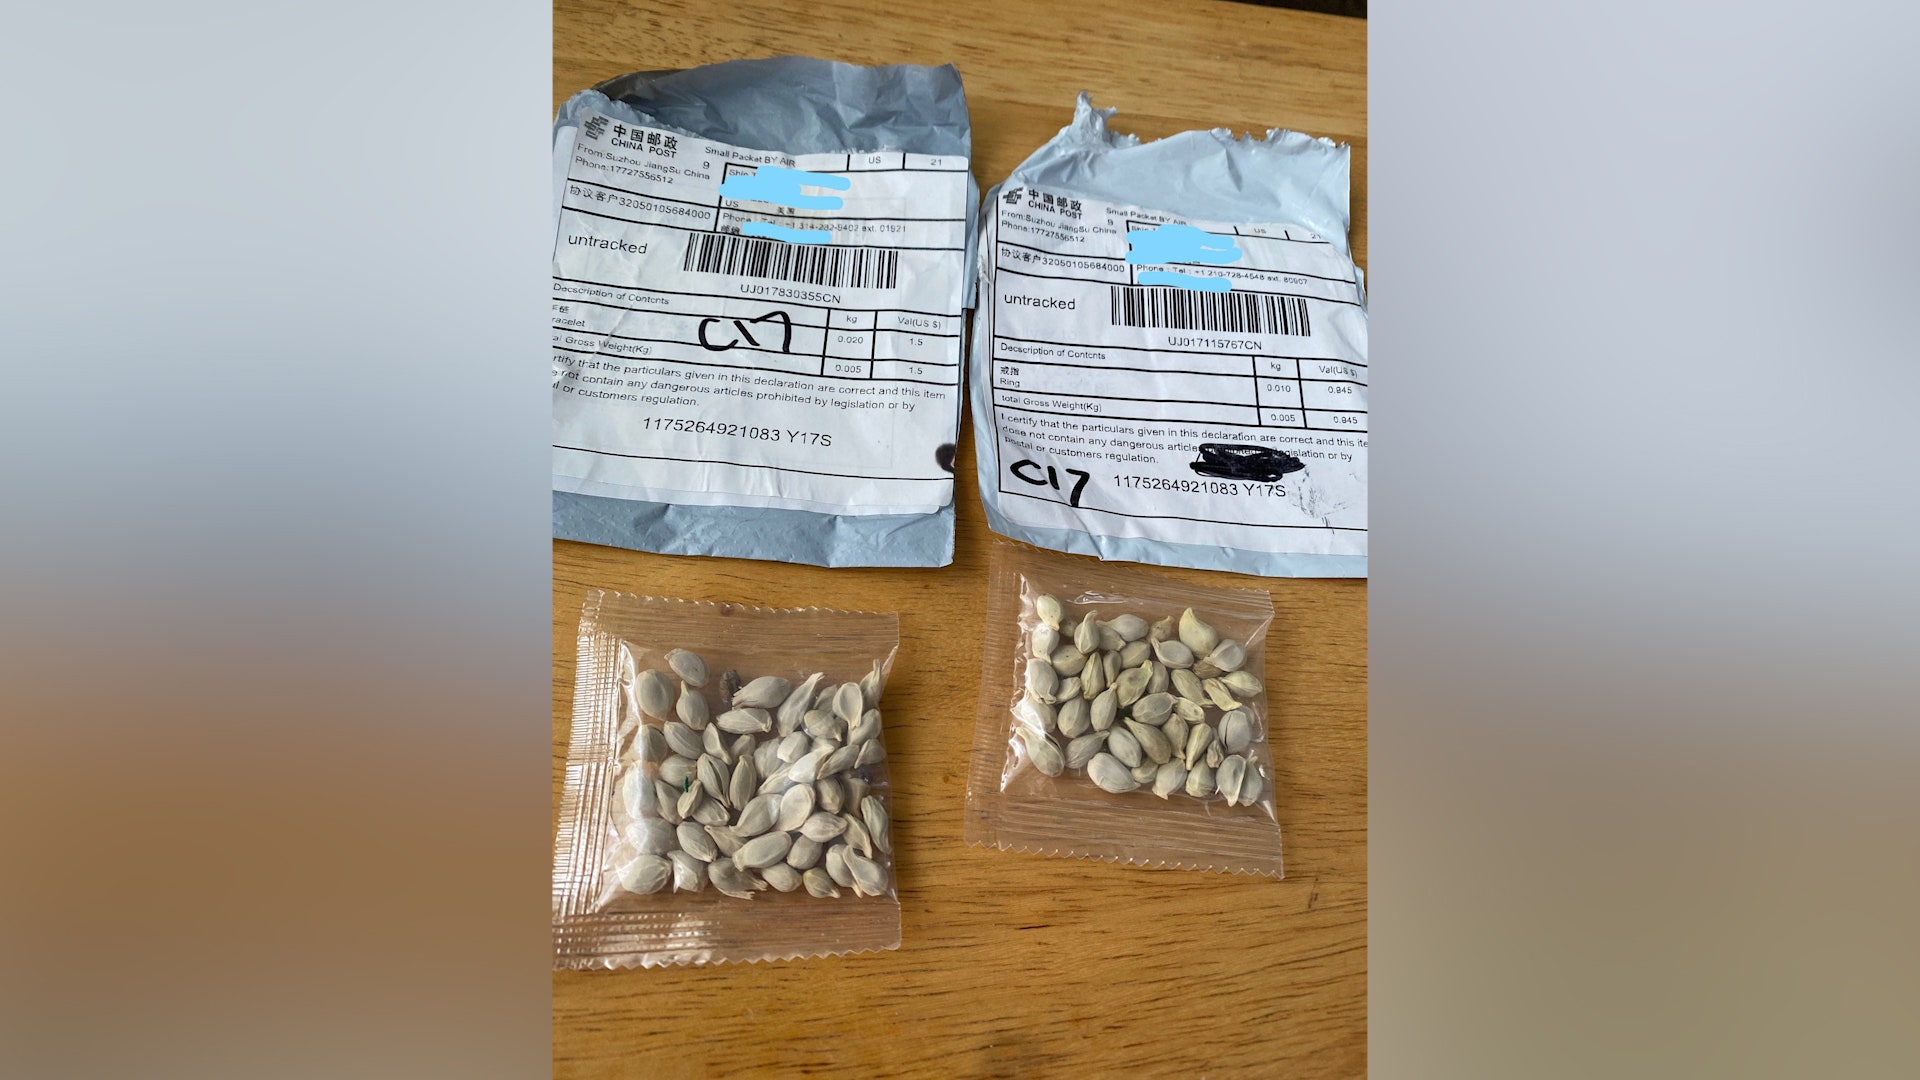 Tan O Seeds 20 grams brand new package seeds expire in 2020 